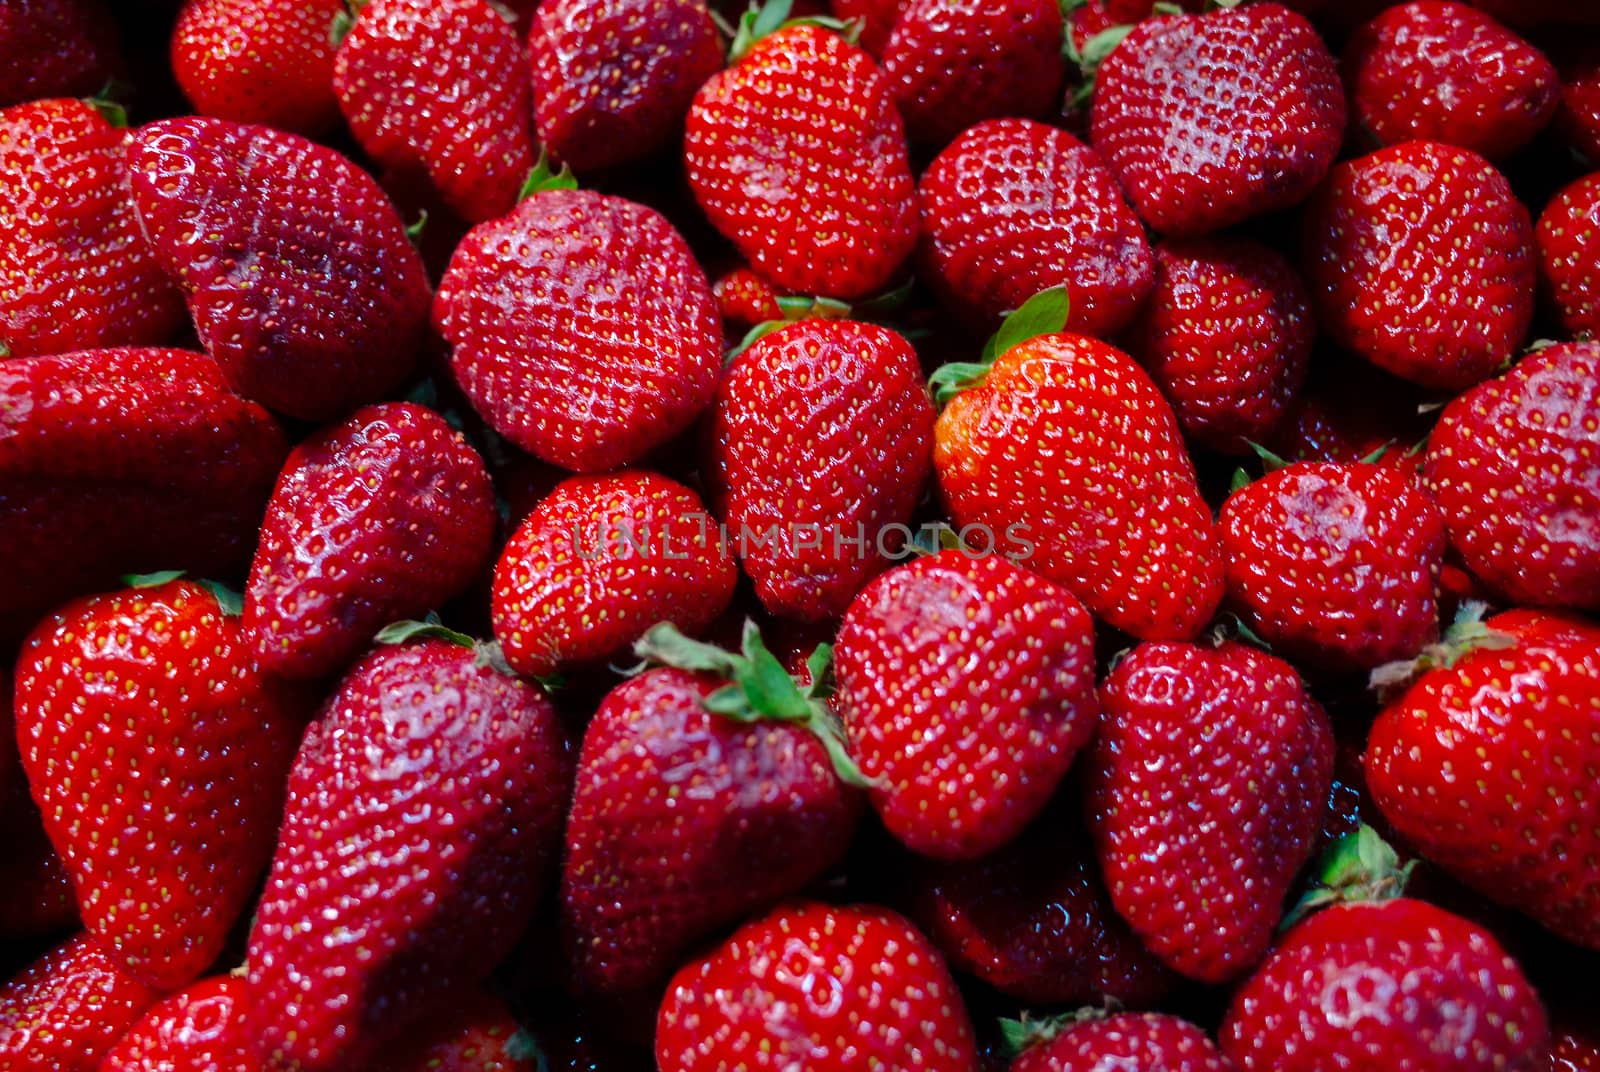 Bright red strawberries on the counter of a fruit shop.